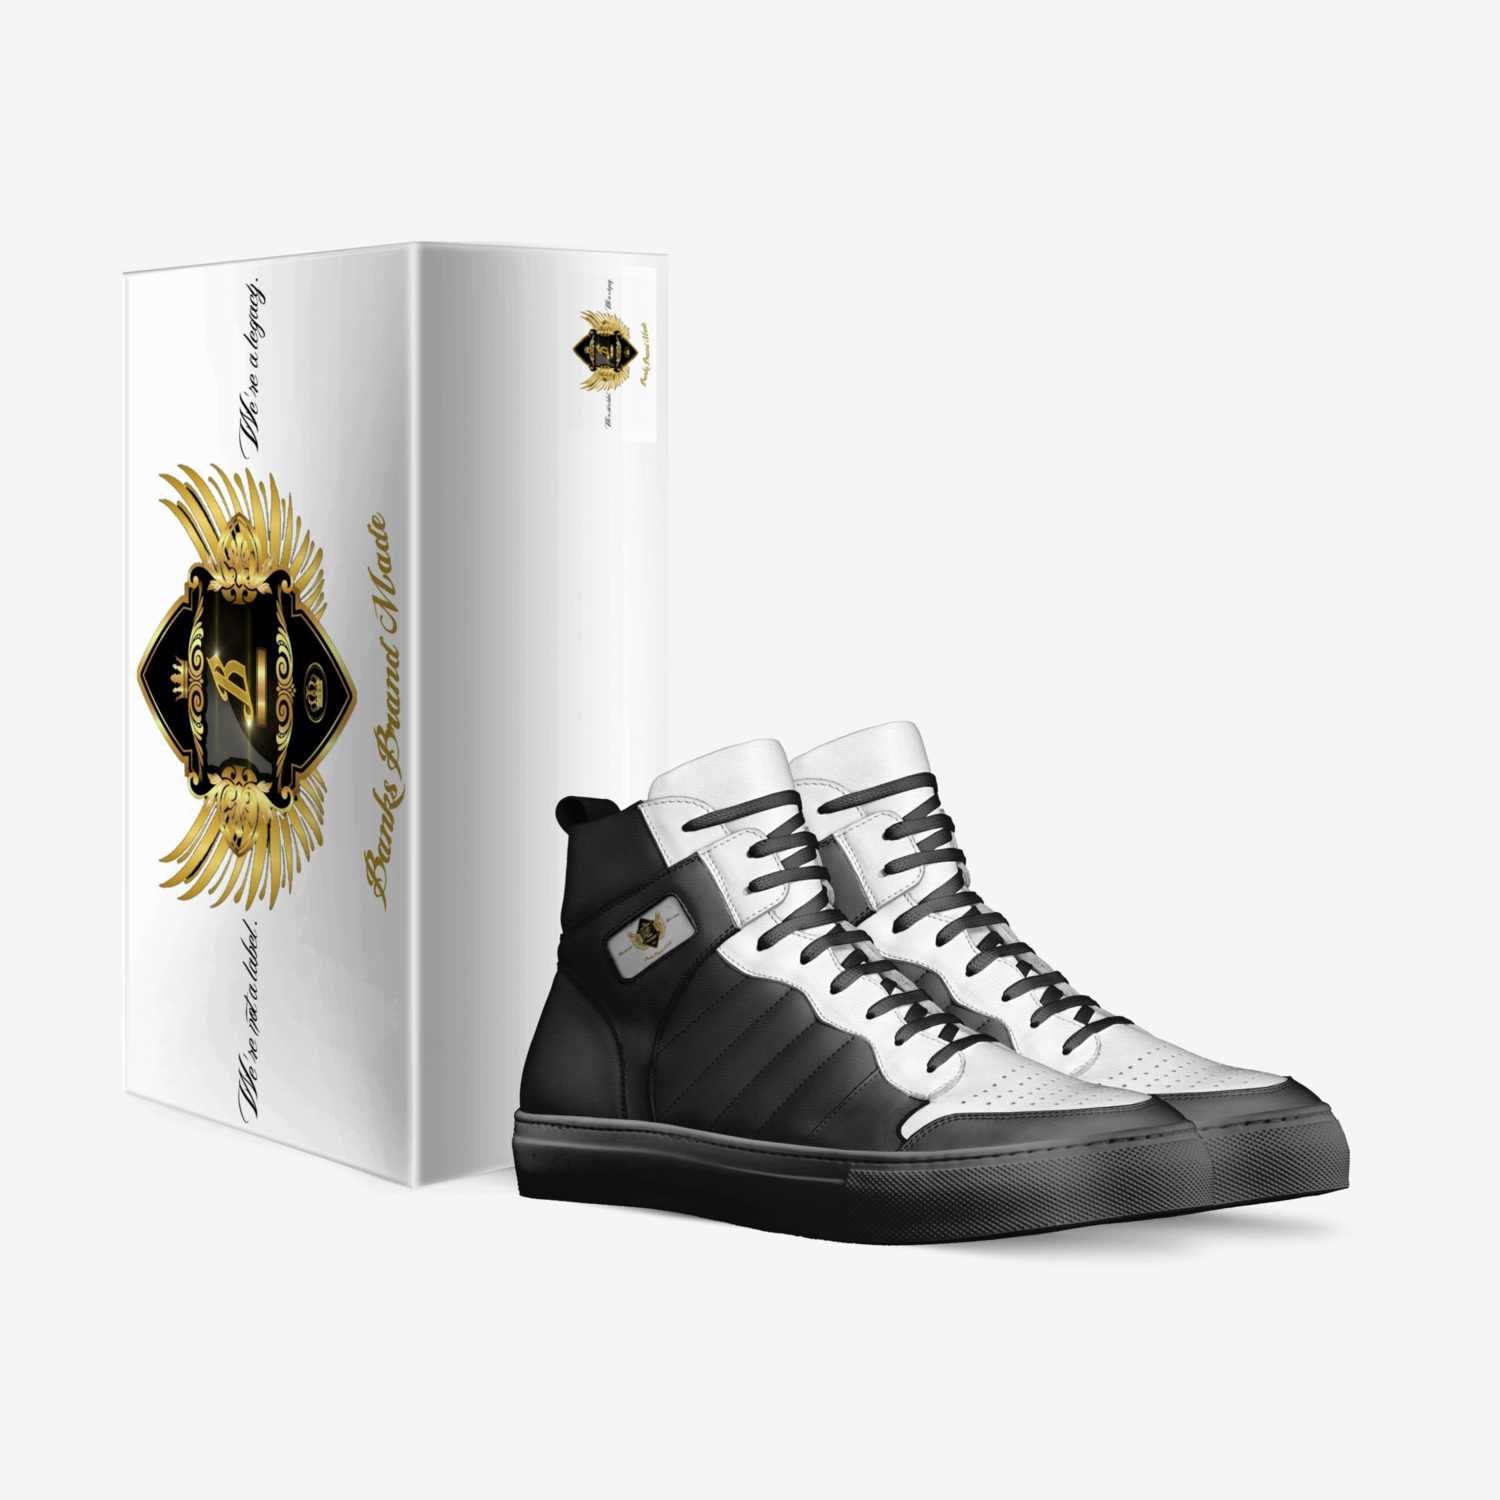 The Banks Brand B2 custom made in Italy shoes by Corey L Banks | Box view